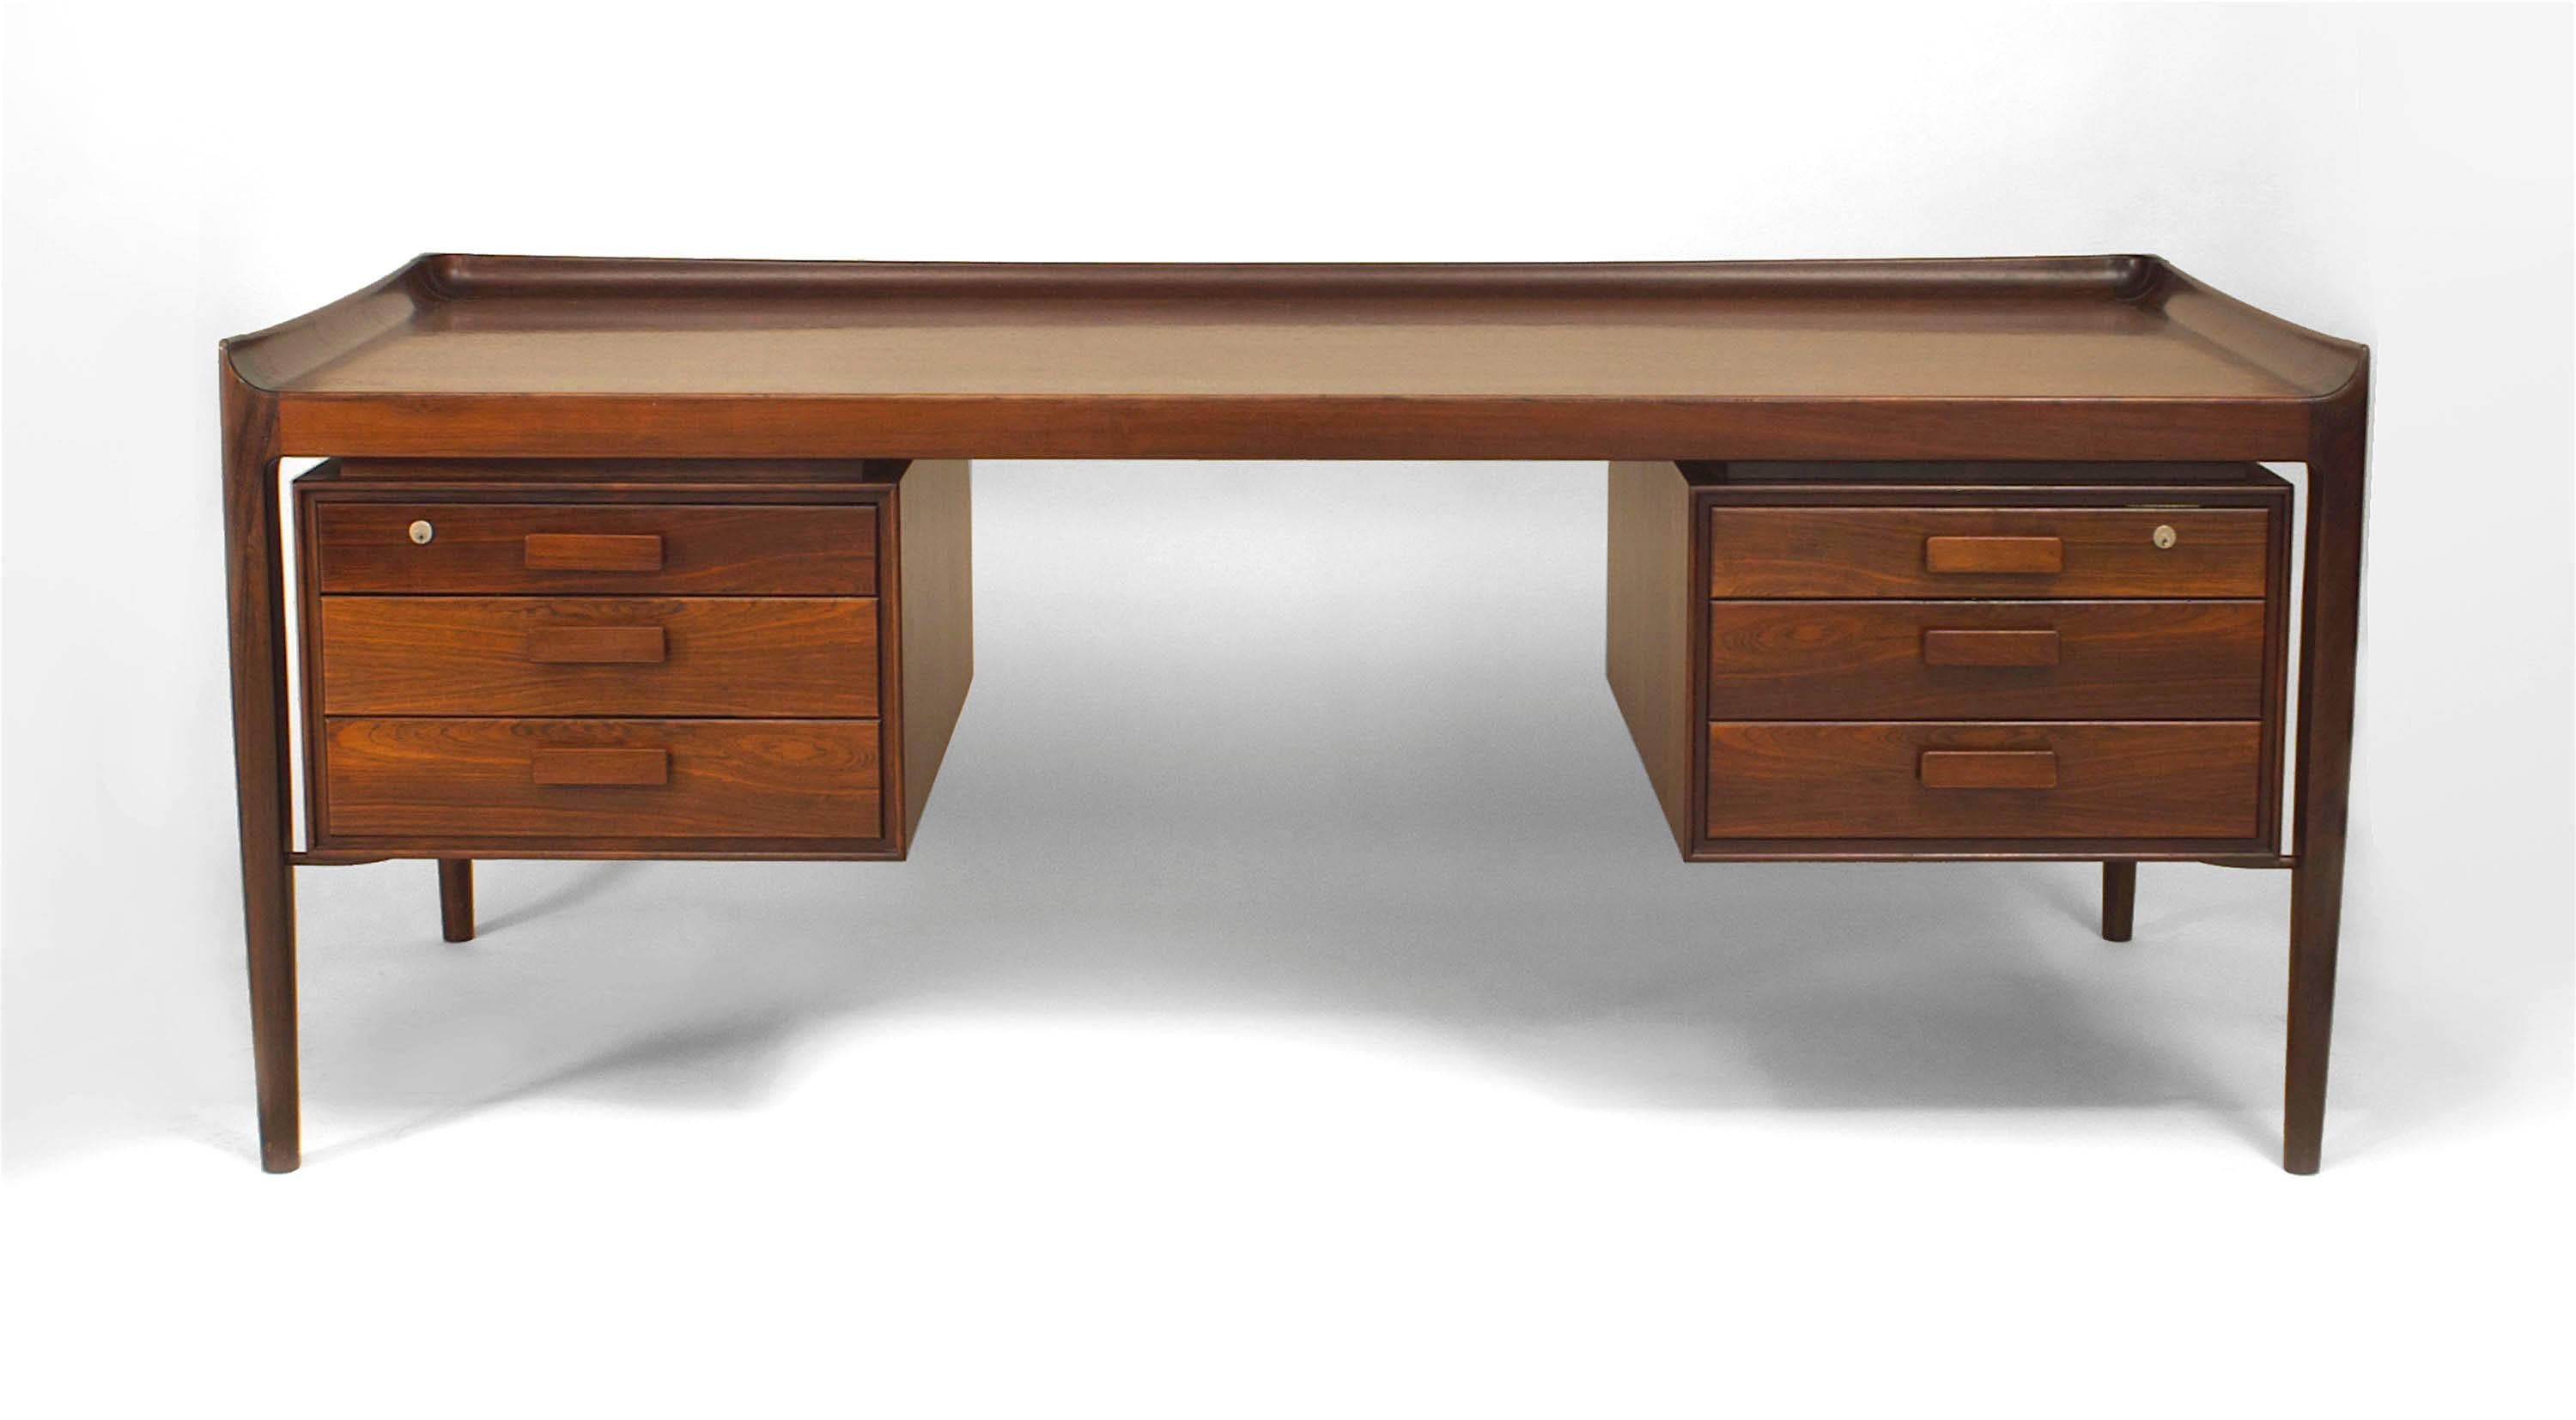 Danish 1950s rosewood knee-hole executive desk with two pair of three drawers on back and a pair of doors on the front with a gallery edge top (Finn Juhl).
 